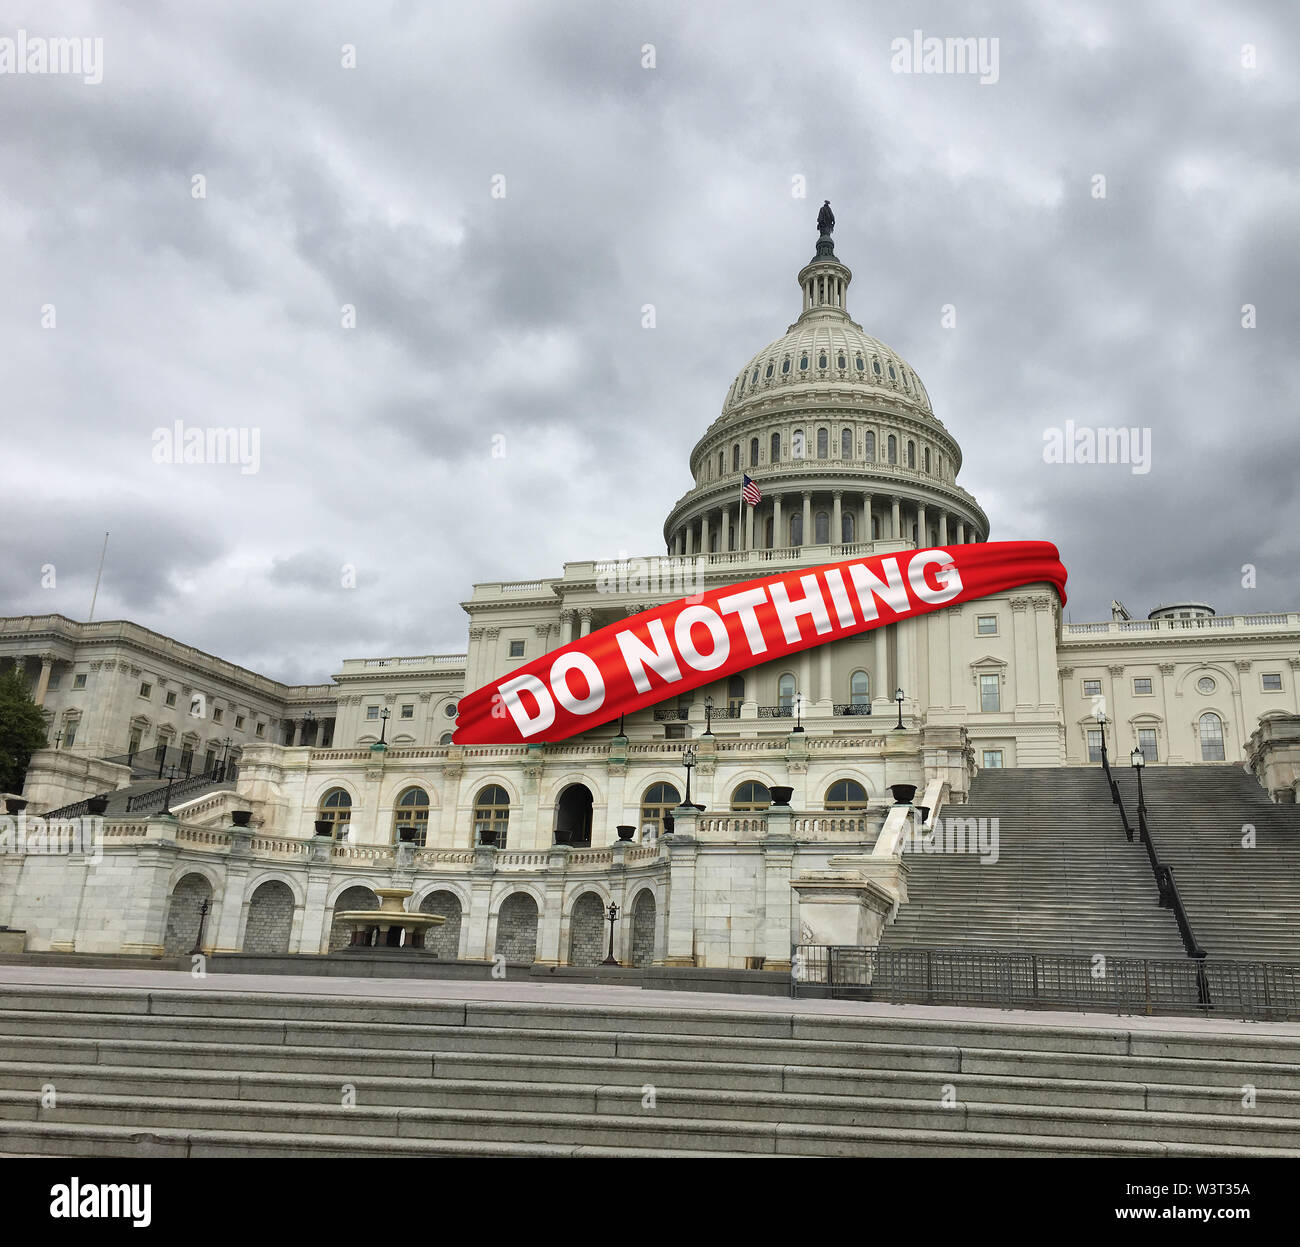 Do nothing congress United States politics and US political gridlock or government stalemate between republicans and democrats in Washington DC. Stock Photo